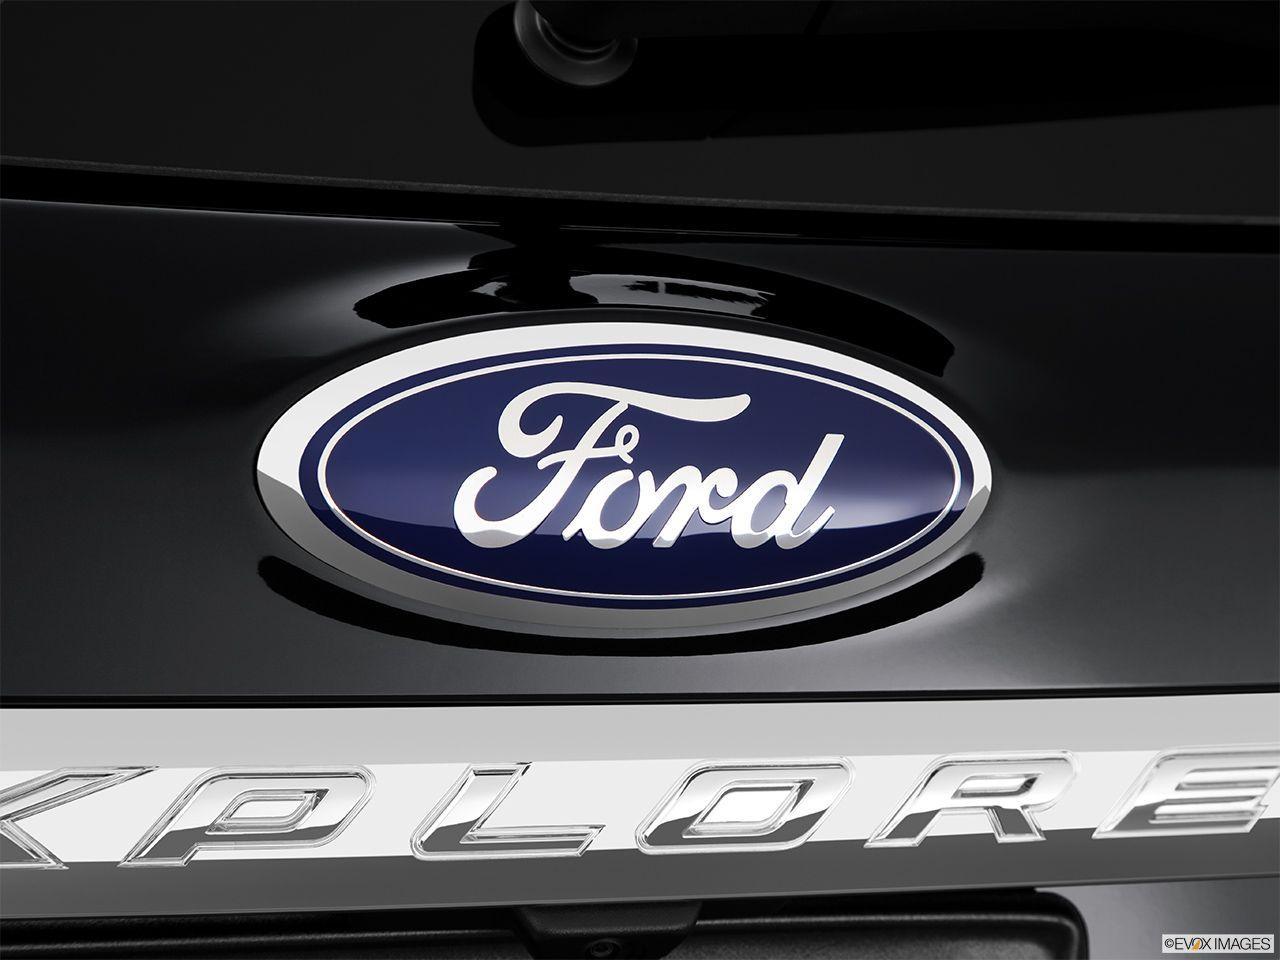 2015 Ford Logo - 2015 Ford Explorer FWD 4 Door XLT - Front angle view 2015 Ford ...